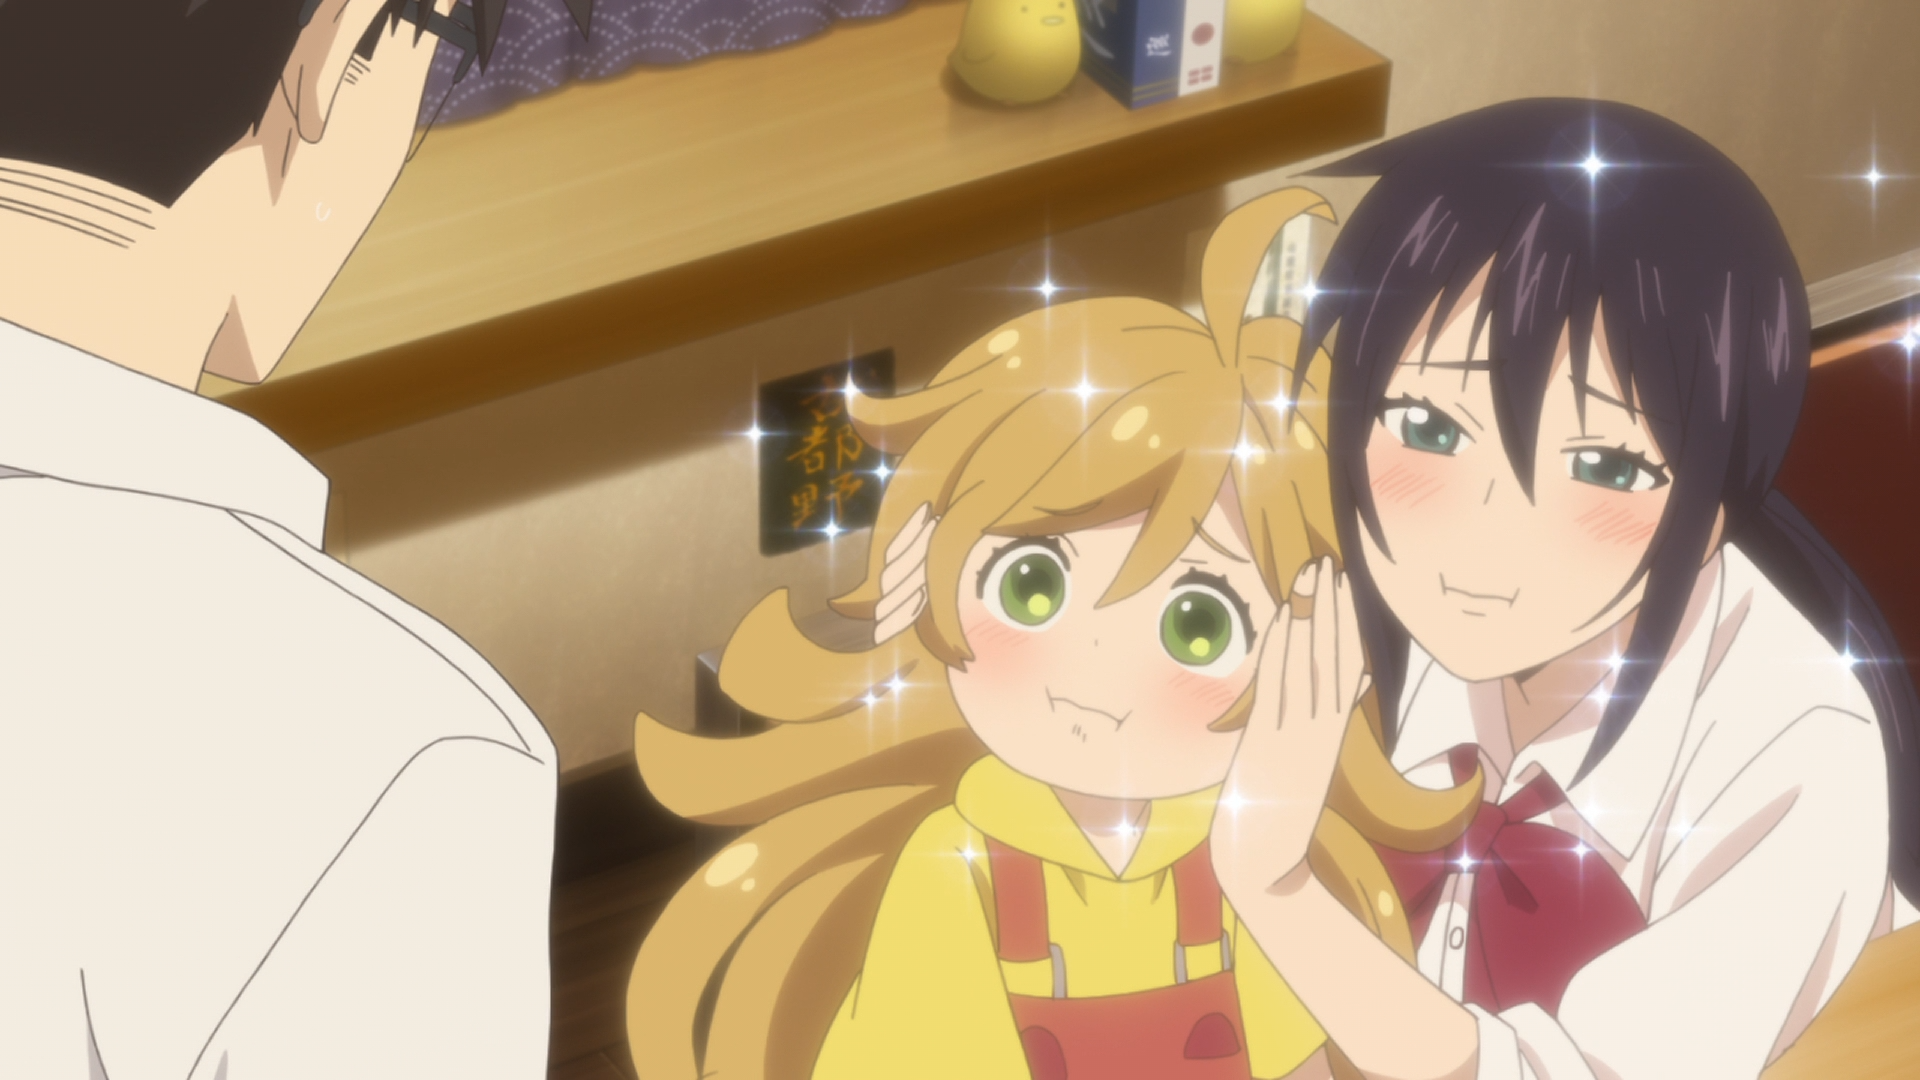 Tsumugi and Kotori attempt to butter up Kohei, Tsumugi's father, by making cute faces in a scene from the sweetness & lightning TV anime.